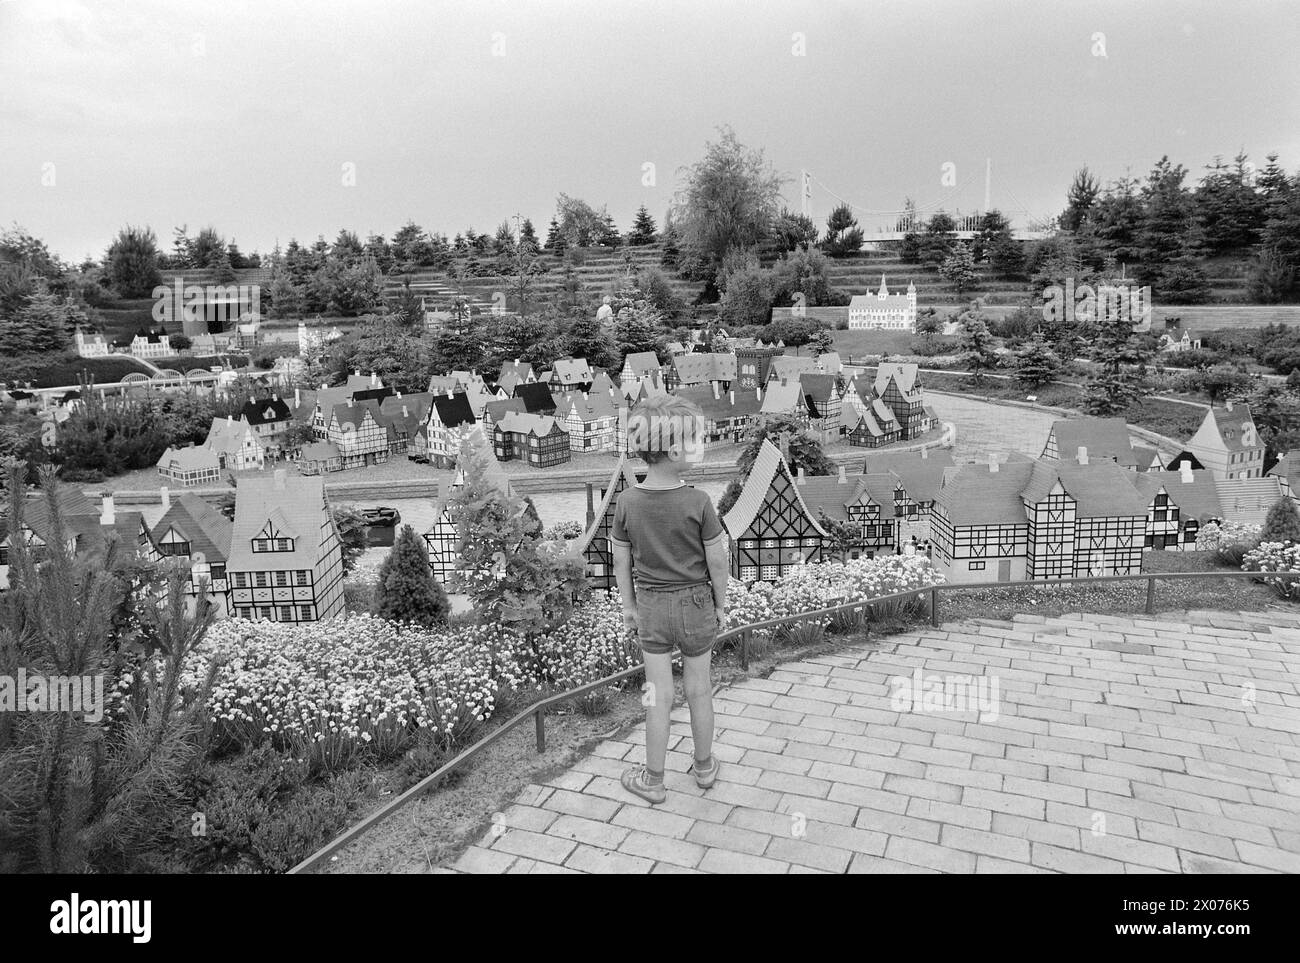 Current 30 - 6 - 1973: Playland for young and oldLegoland is a mini-kingdom that lives only on tourism. Last year, this fantasy world near Billund in Denmark was visited by no less than 777,000 enthusiastic people – young and old. The peak visit in one day is 20,000 people. Legoland is an adventure world for children, but it still attracts more adults. Last year, fully 70 per cent of the visitors were adults.  The houses in Legoland have an average height of about one metre. The cities consist of old and new districts and everything is built historically and architecturally correctly according Stock Photo